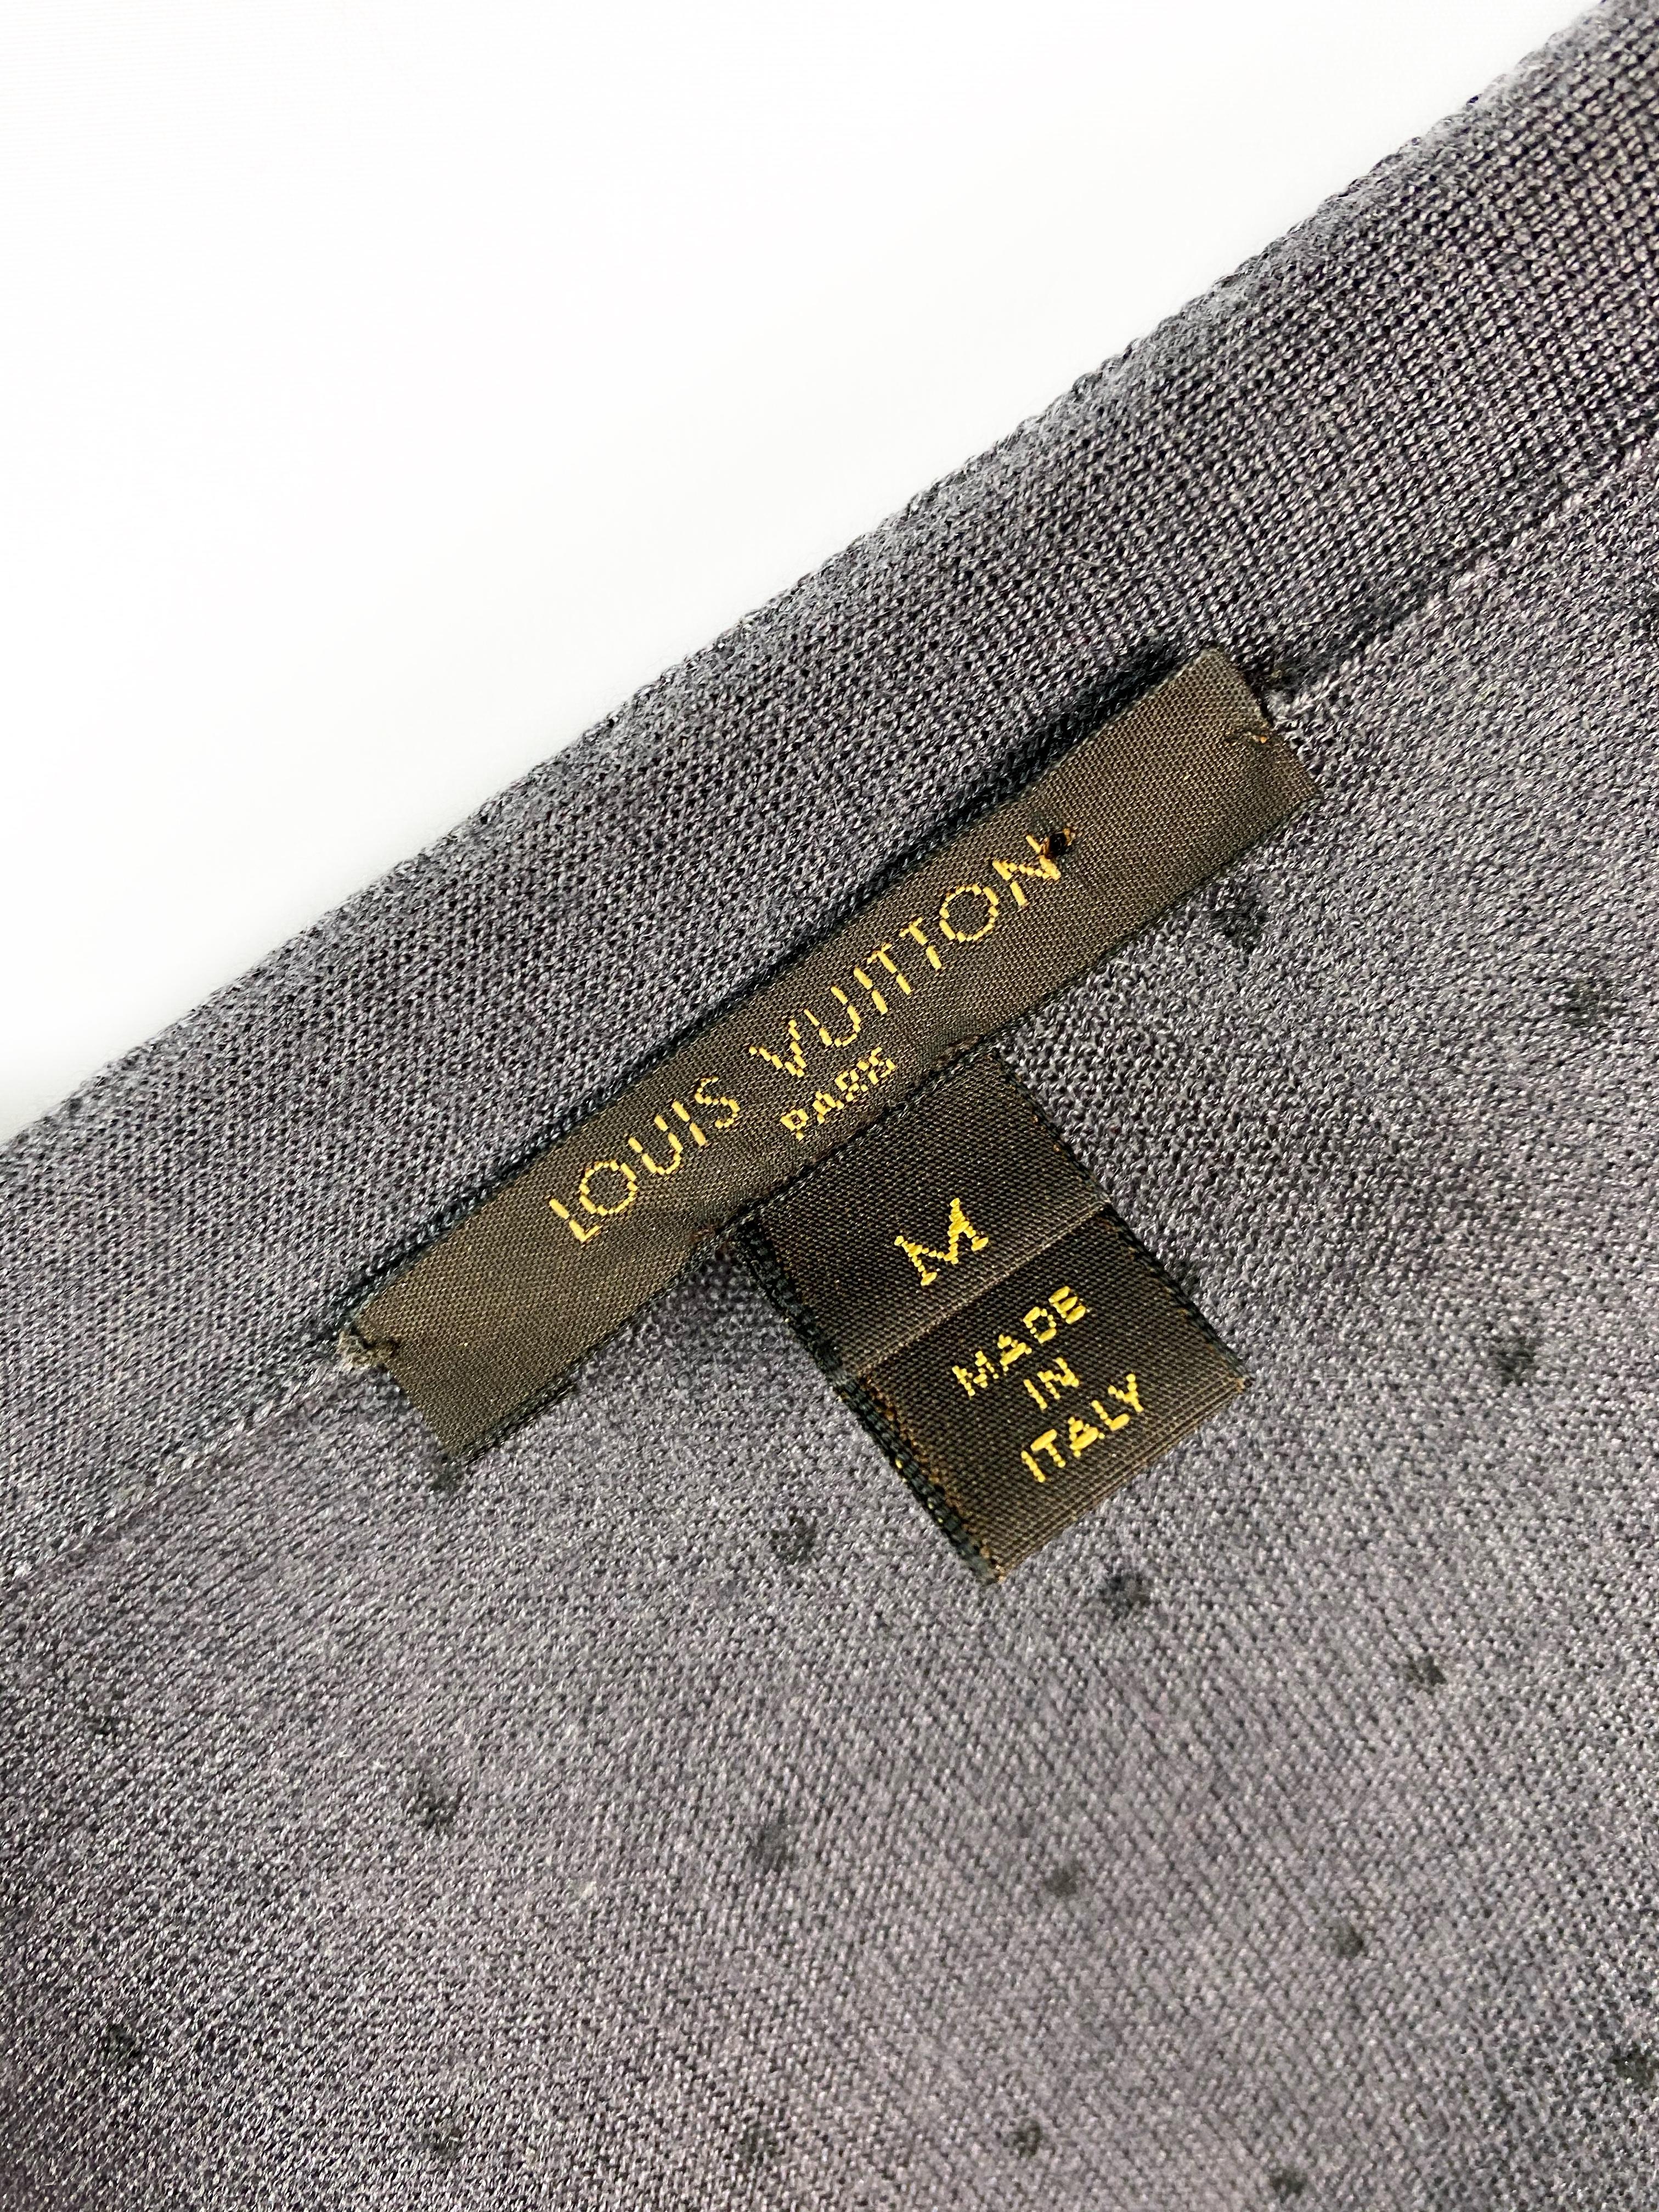 LOUIS VUITTON Black and Grey Polka Dot Cashmere Sweater w/ Buttons and Belt  3